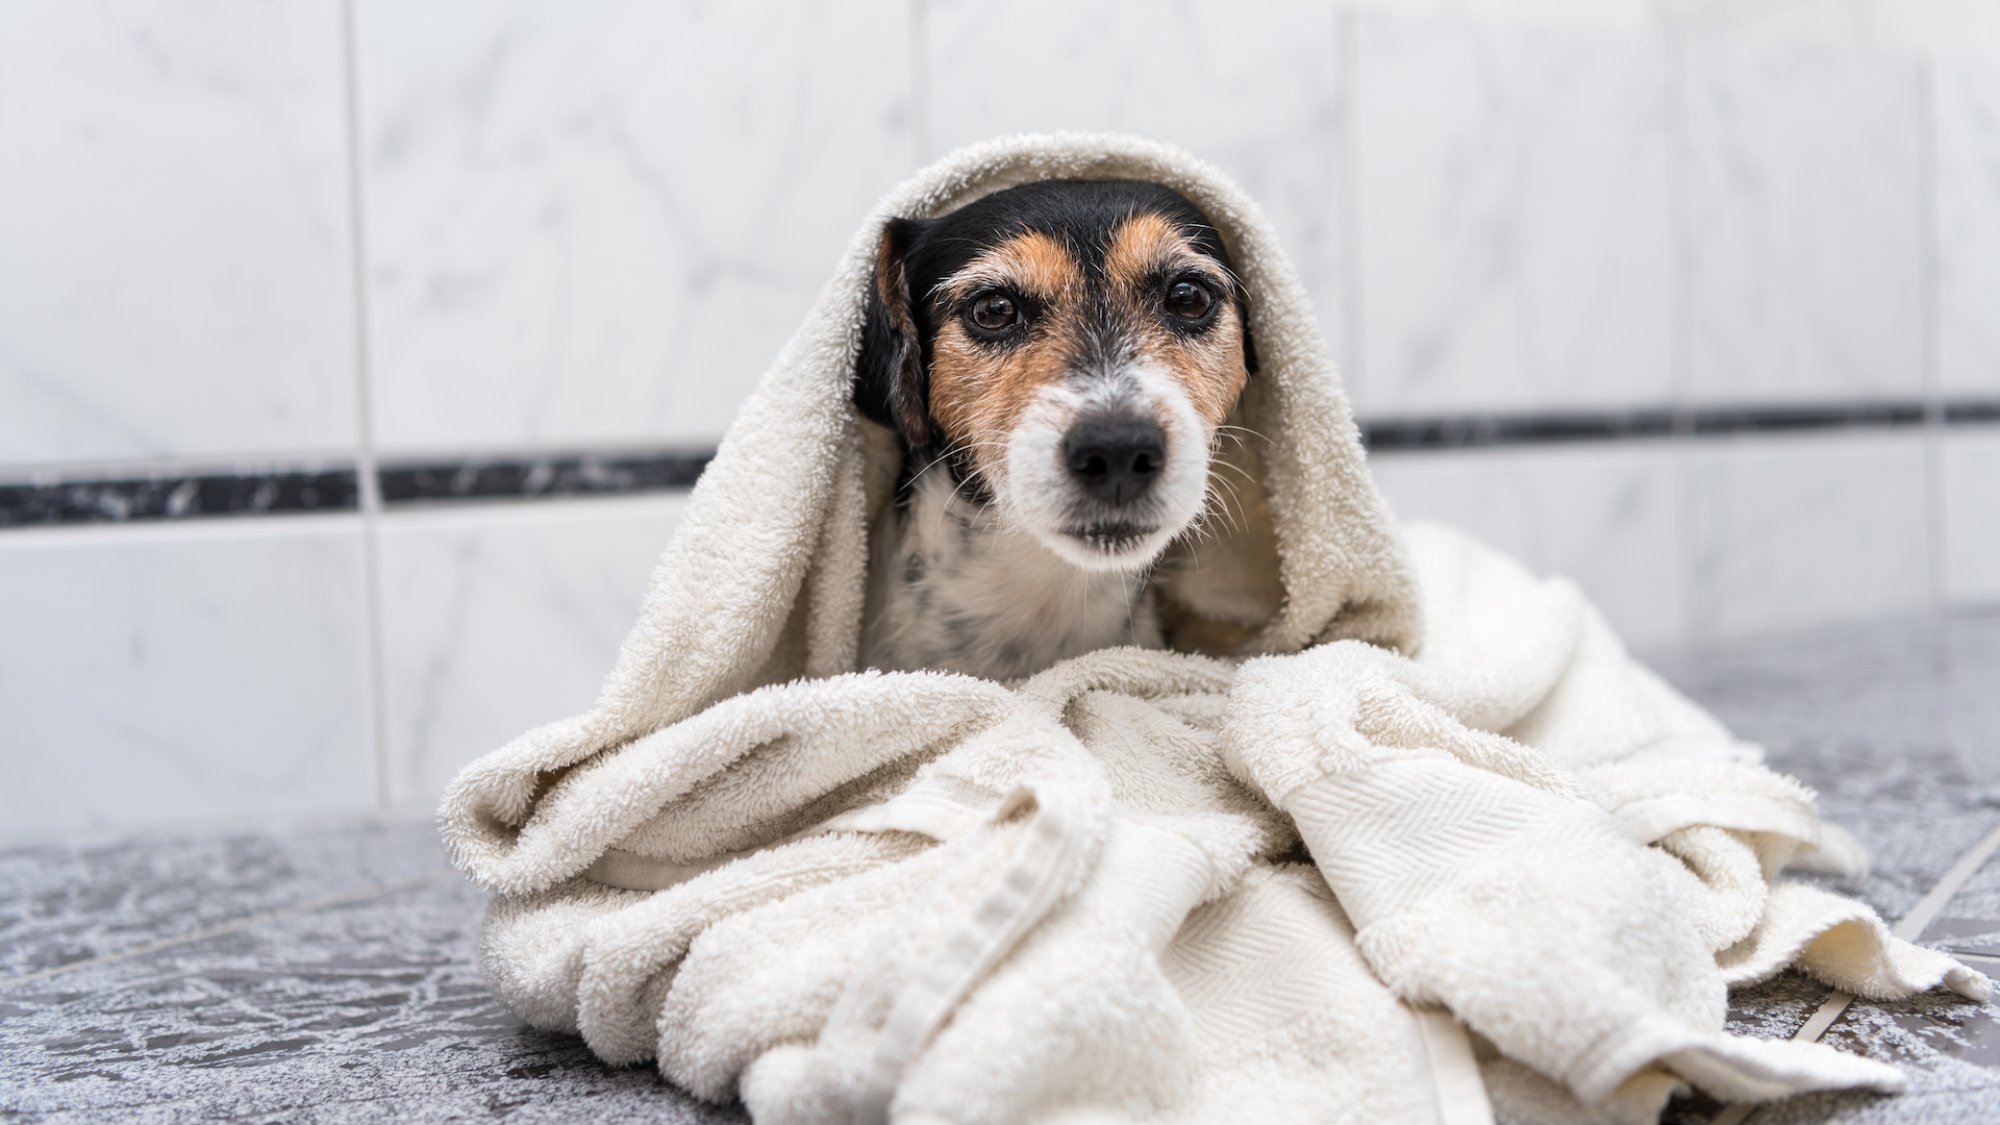 Jack Russell Terrier dog sits wrapped in bath towel after bathing on the floor.